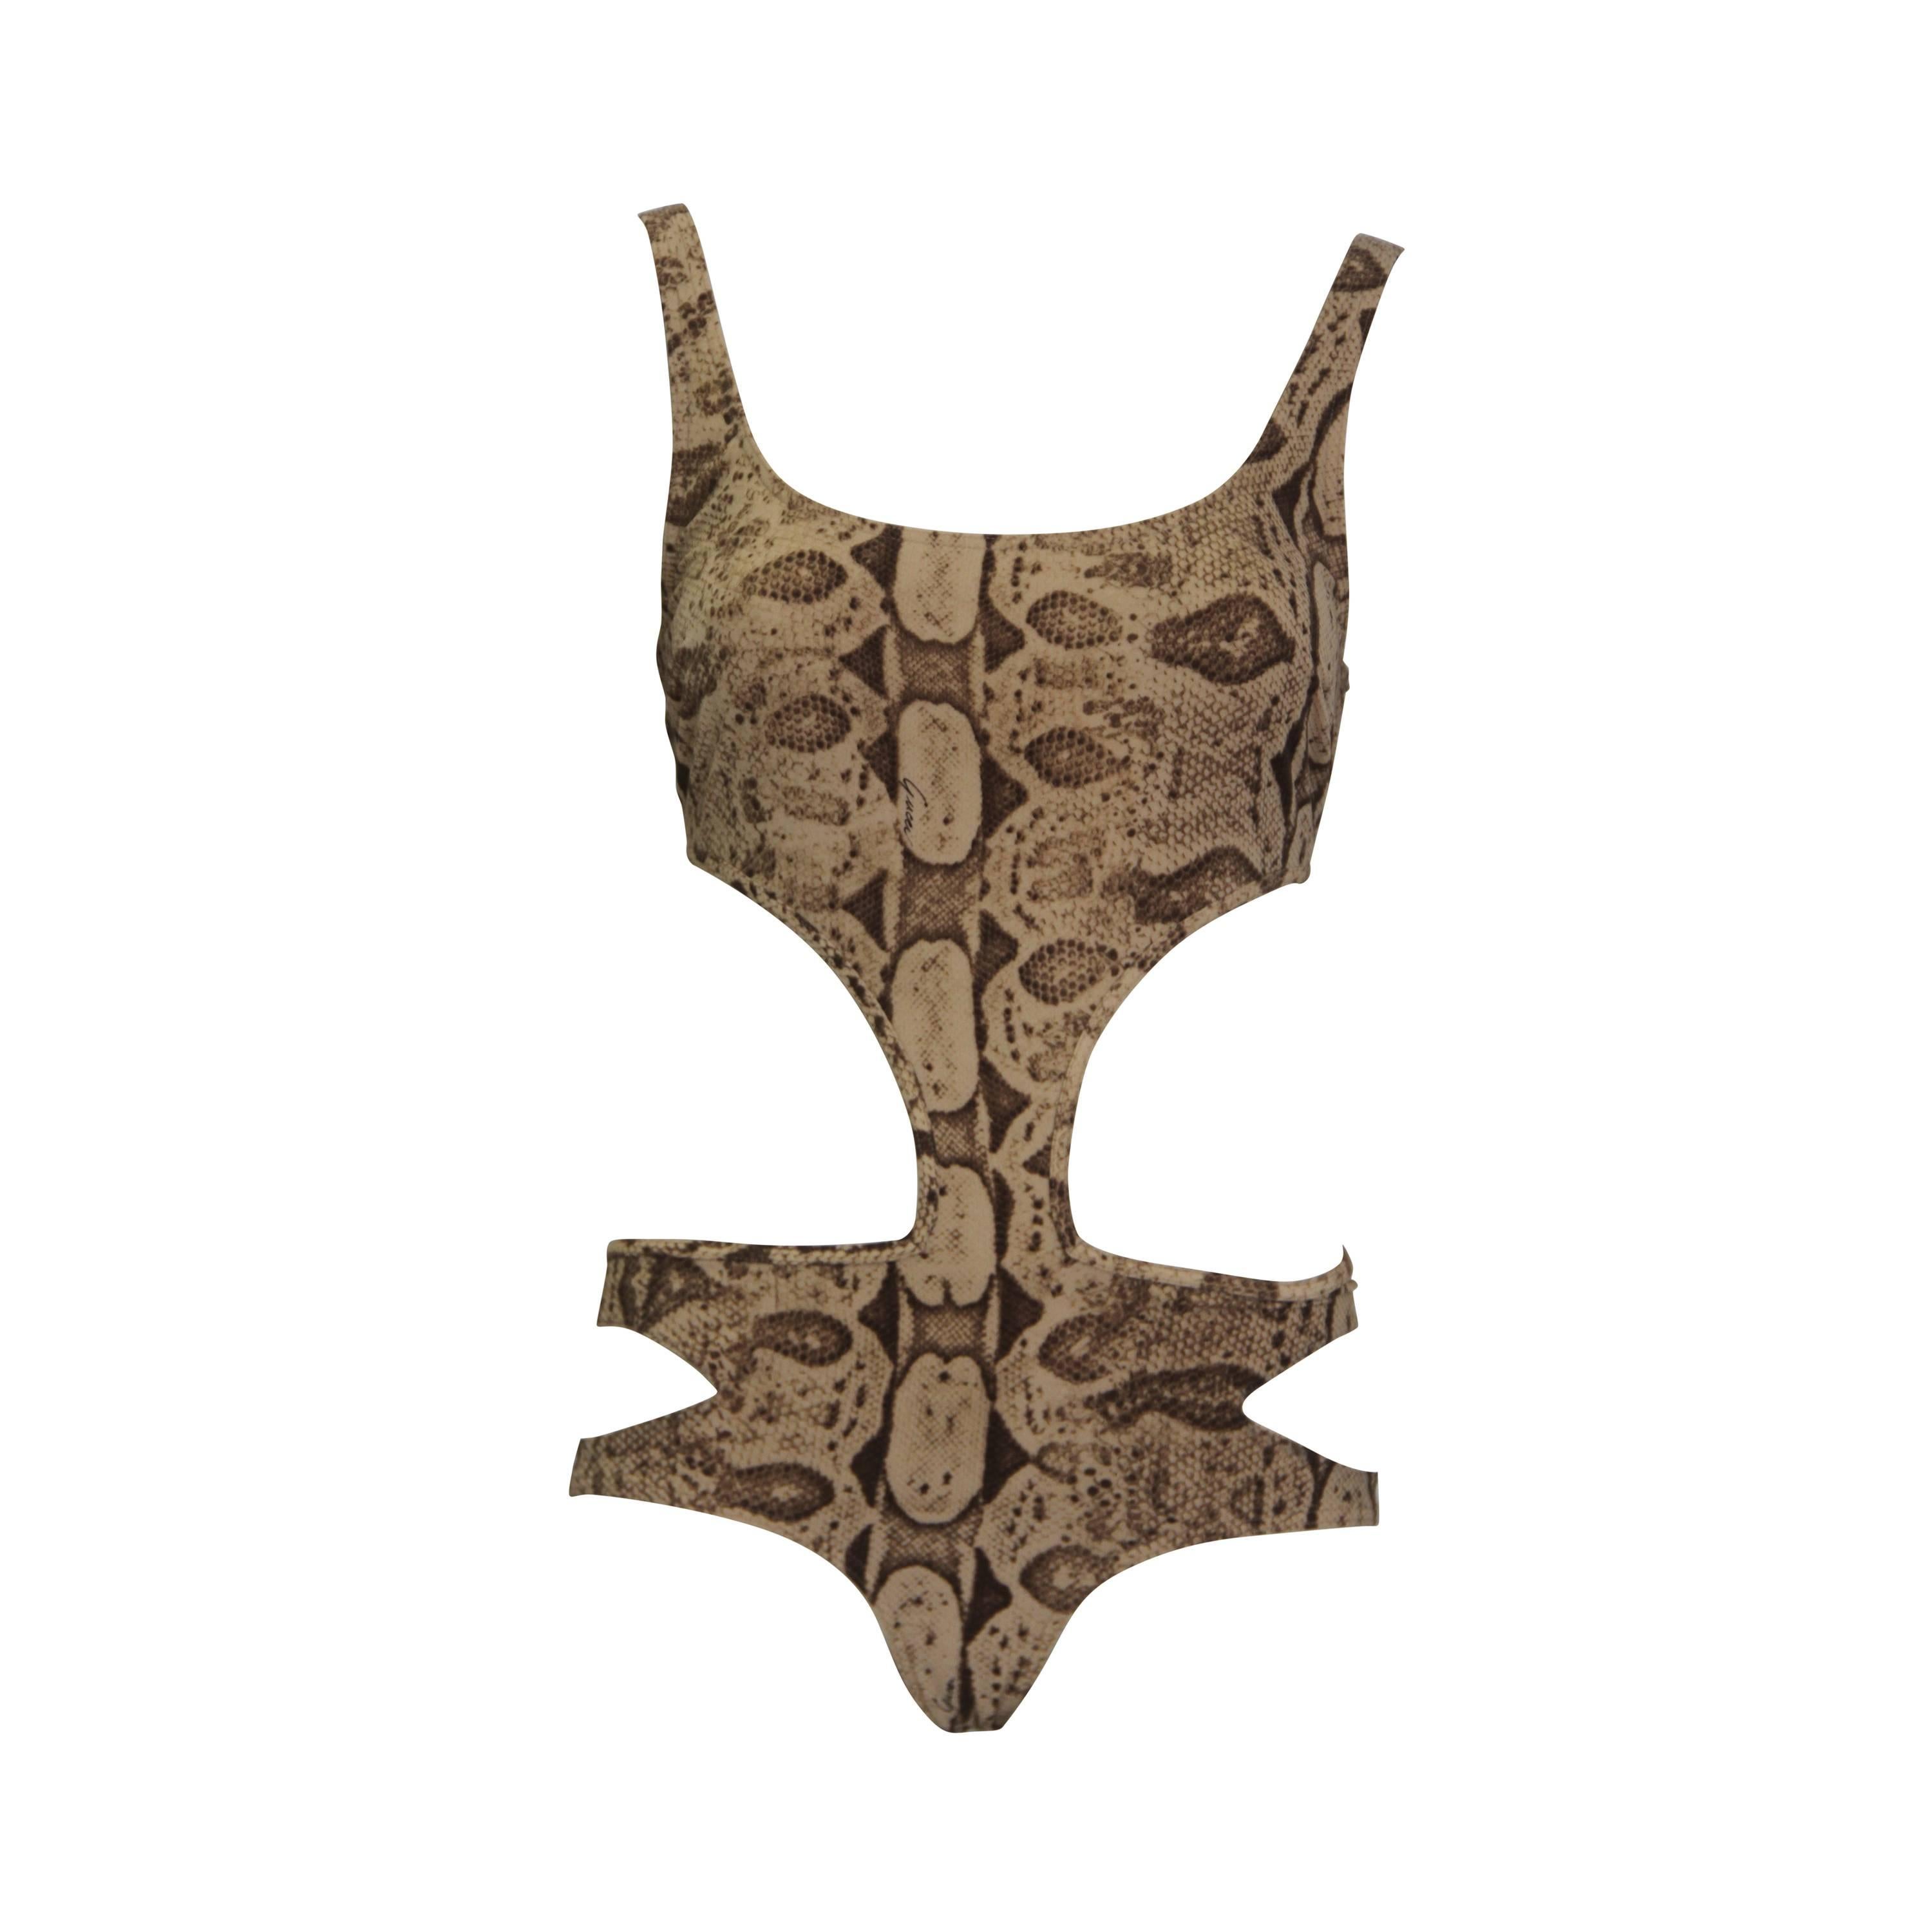 Iconic Tom Ford For Gucci Python Printed Cut-Out Bodysuit Spring 2000 For Sale